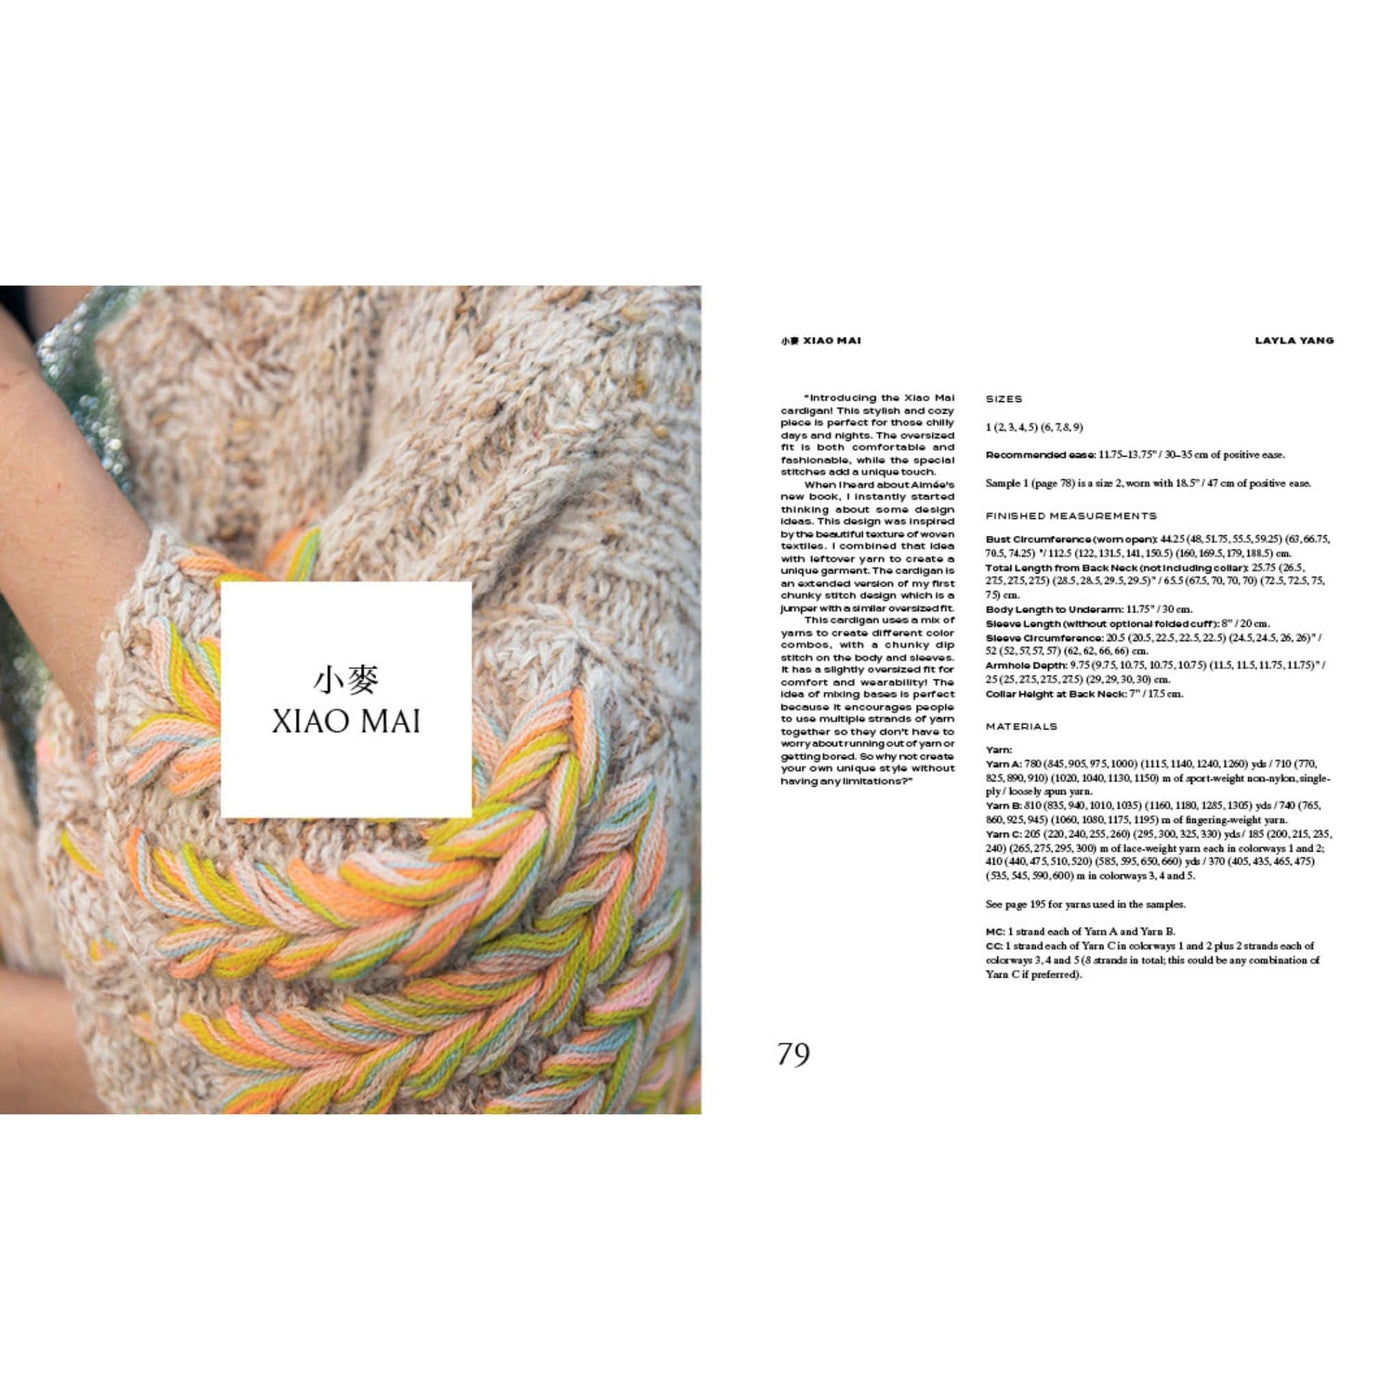 Spread from Neons & Neutrals: A Knitwear Collection Curated by Aimée Gille of La Bien Aimée. Book is published by Laine. Left page shows photo of embellished sweater sleeve and XIAO MAI caption and right page includes pattern information and specifics.